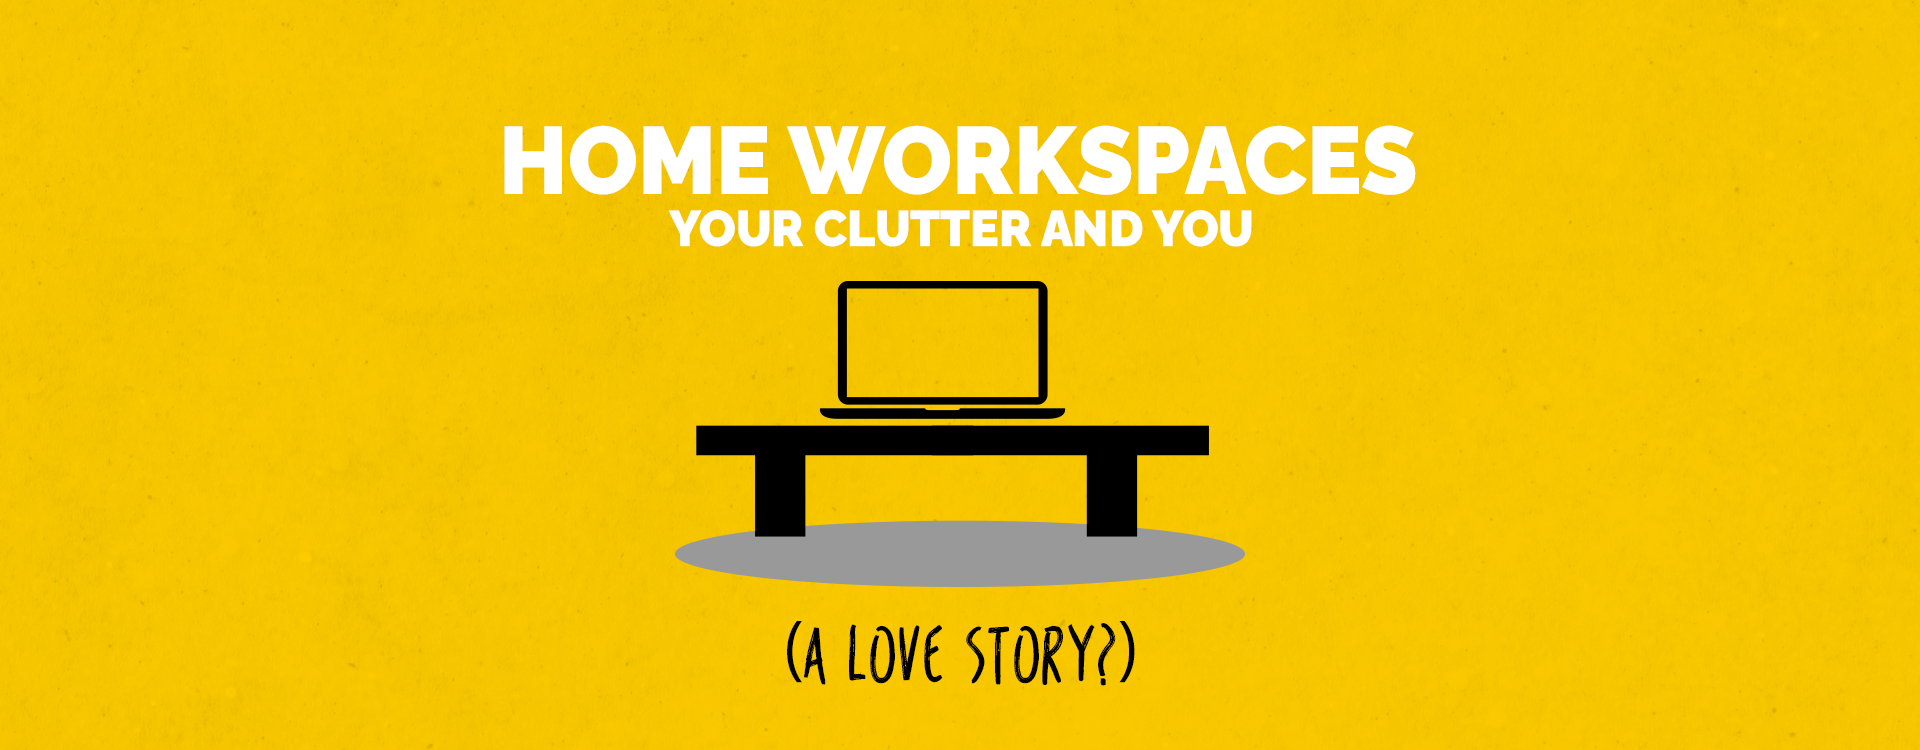 Home Workspaces: Your Clutter And You (A Love Story?)